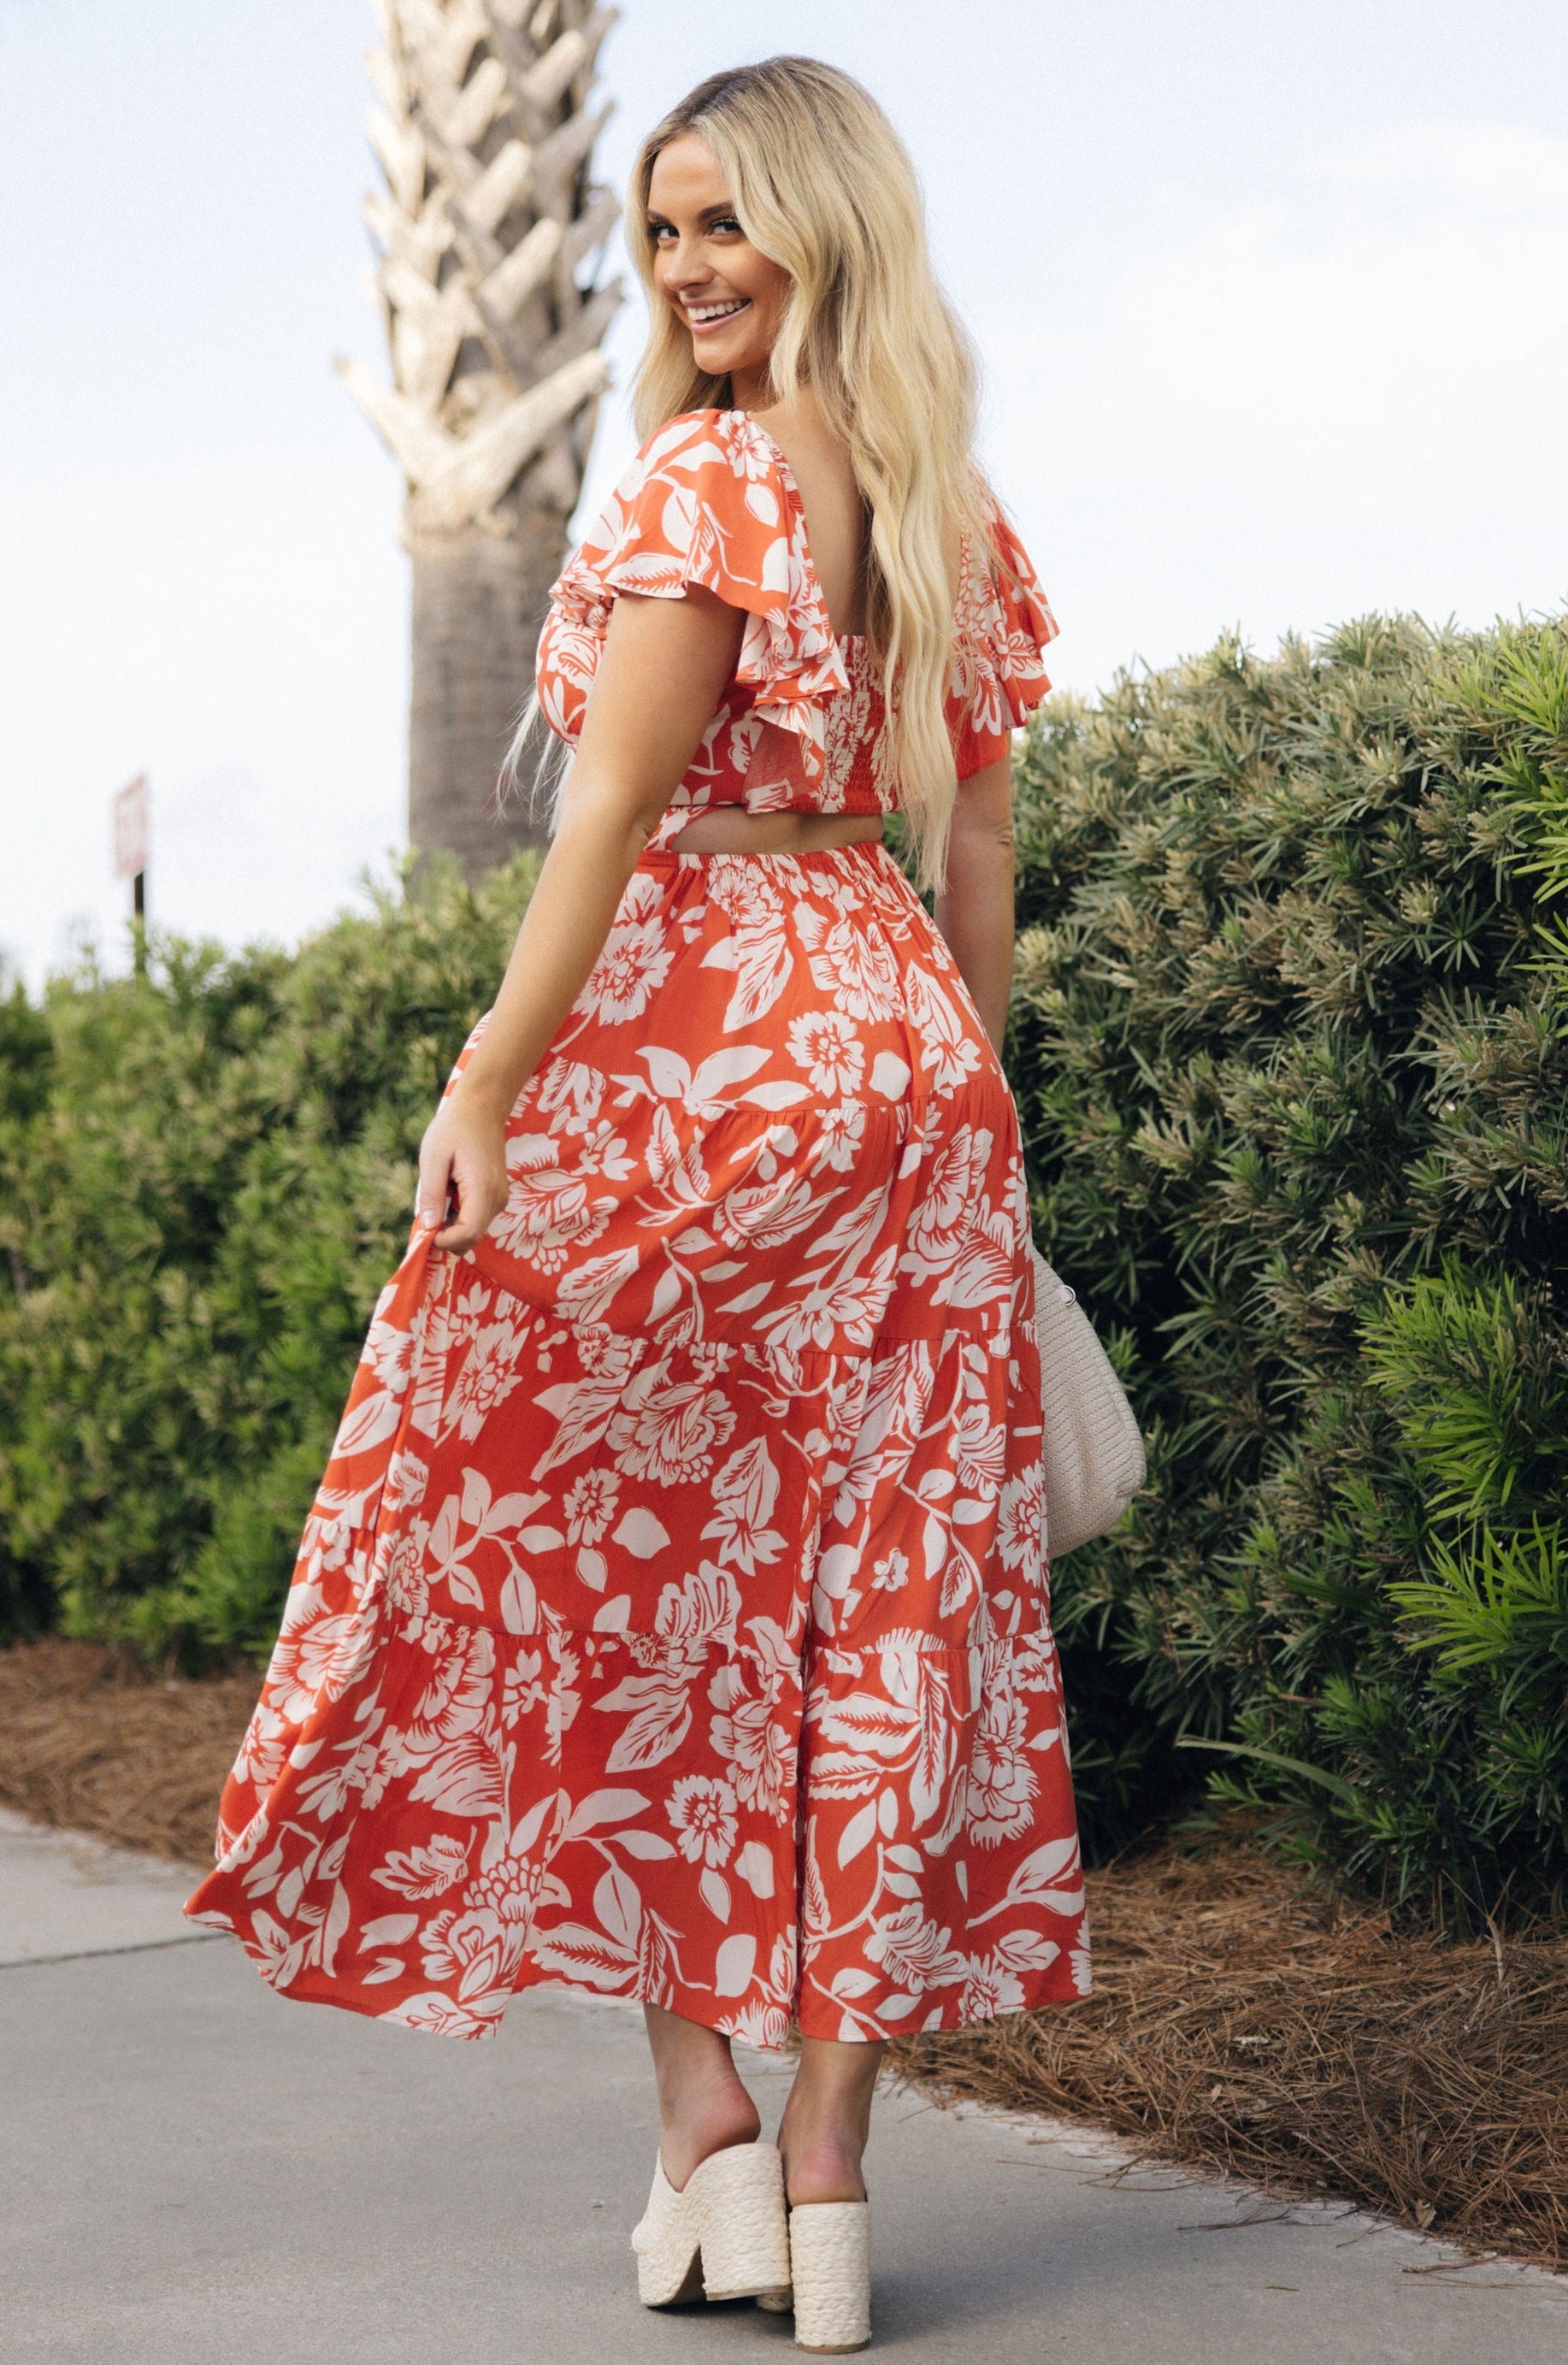 Full body back view of female model wearing the Elena Orange & Cream Floral Midi Dress which features Orange and White Floral Design, Midi Length, Orange Thigh Length Lining, Tiered Body, Smocked Waistband, Sweetheart Neckline, Ruffle Straps and Open Back